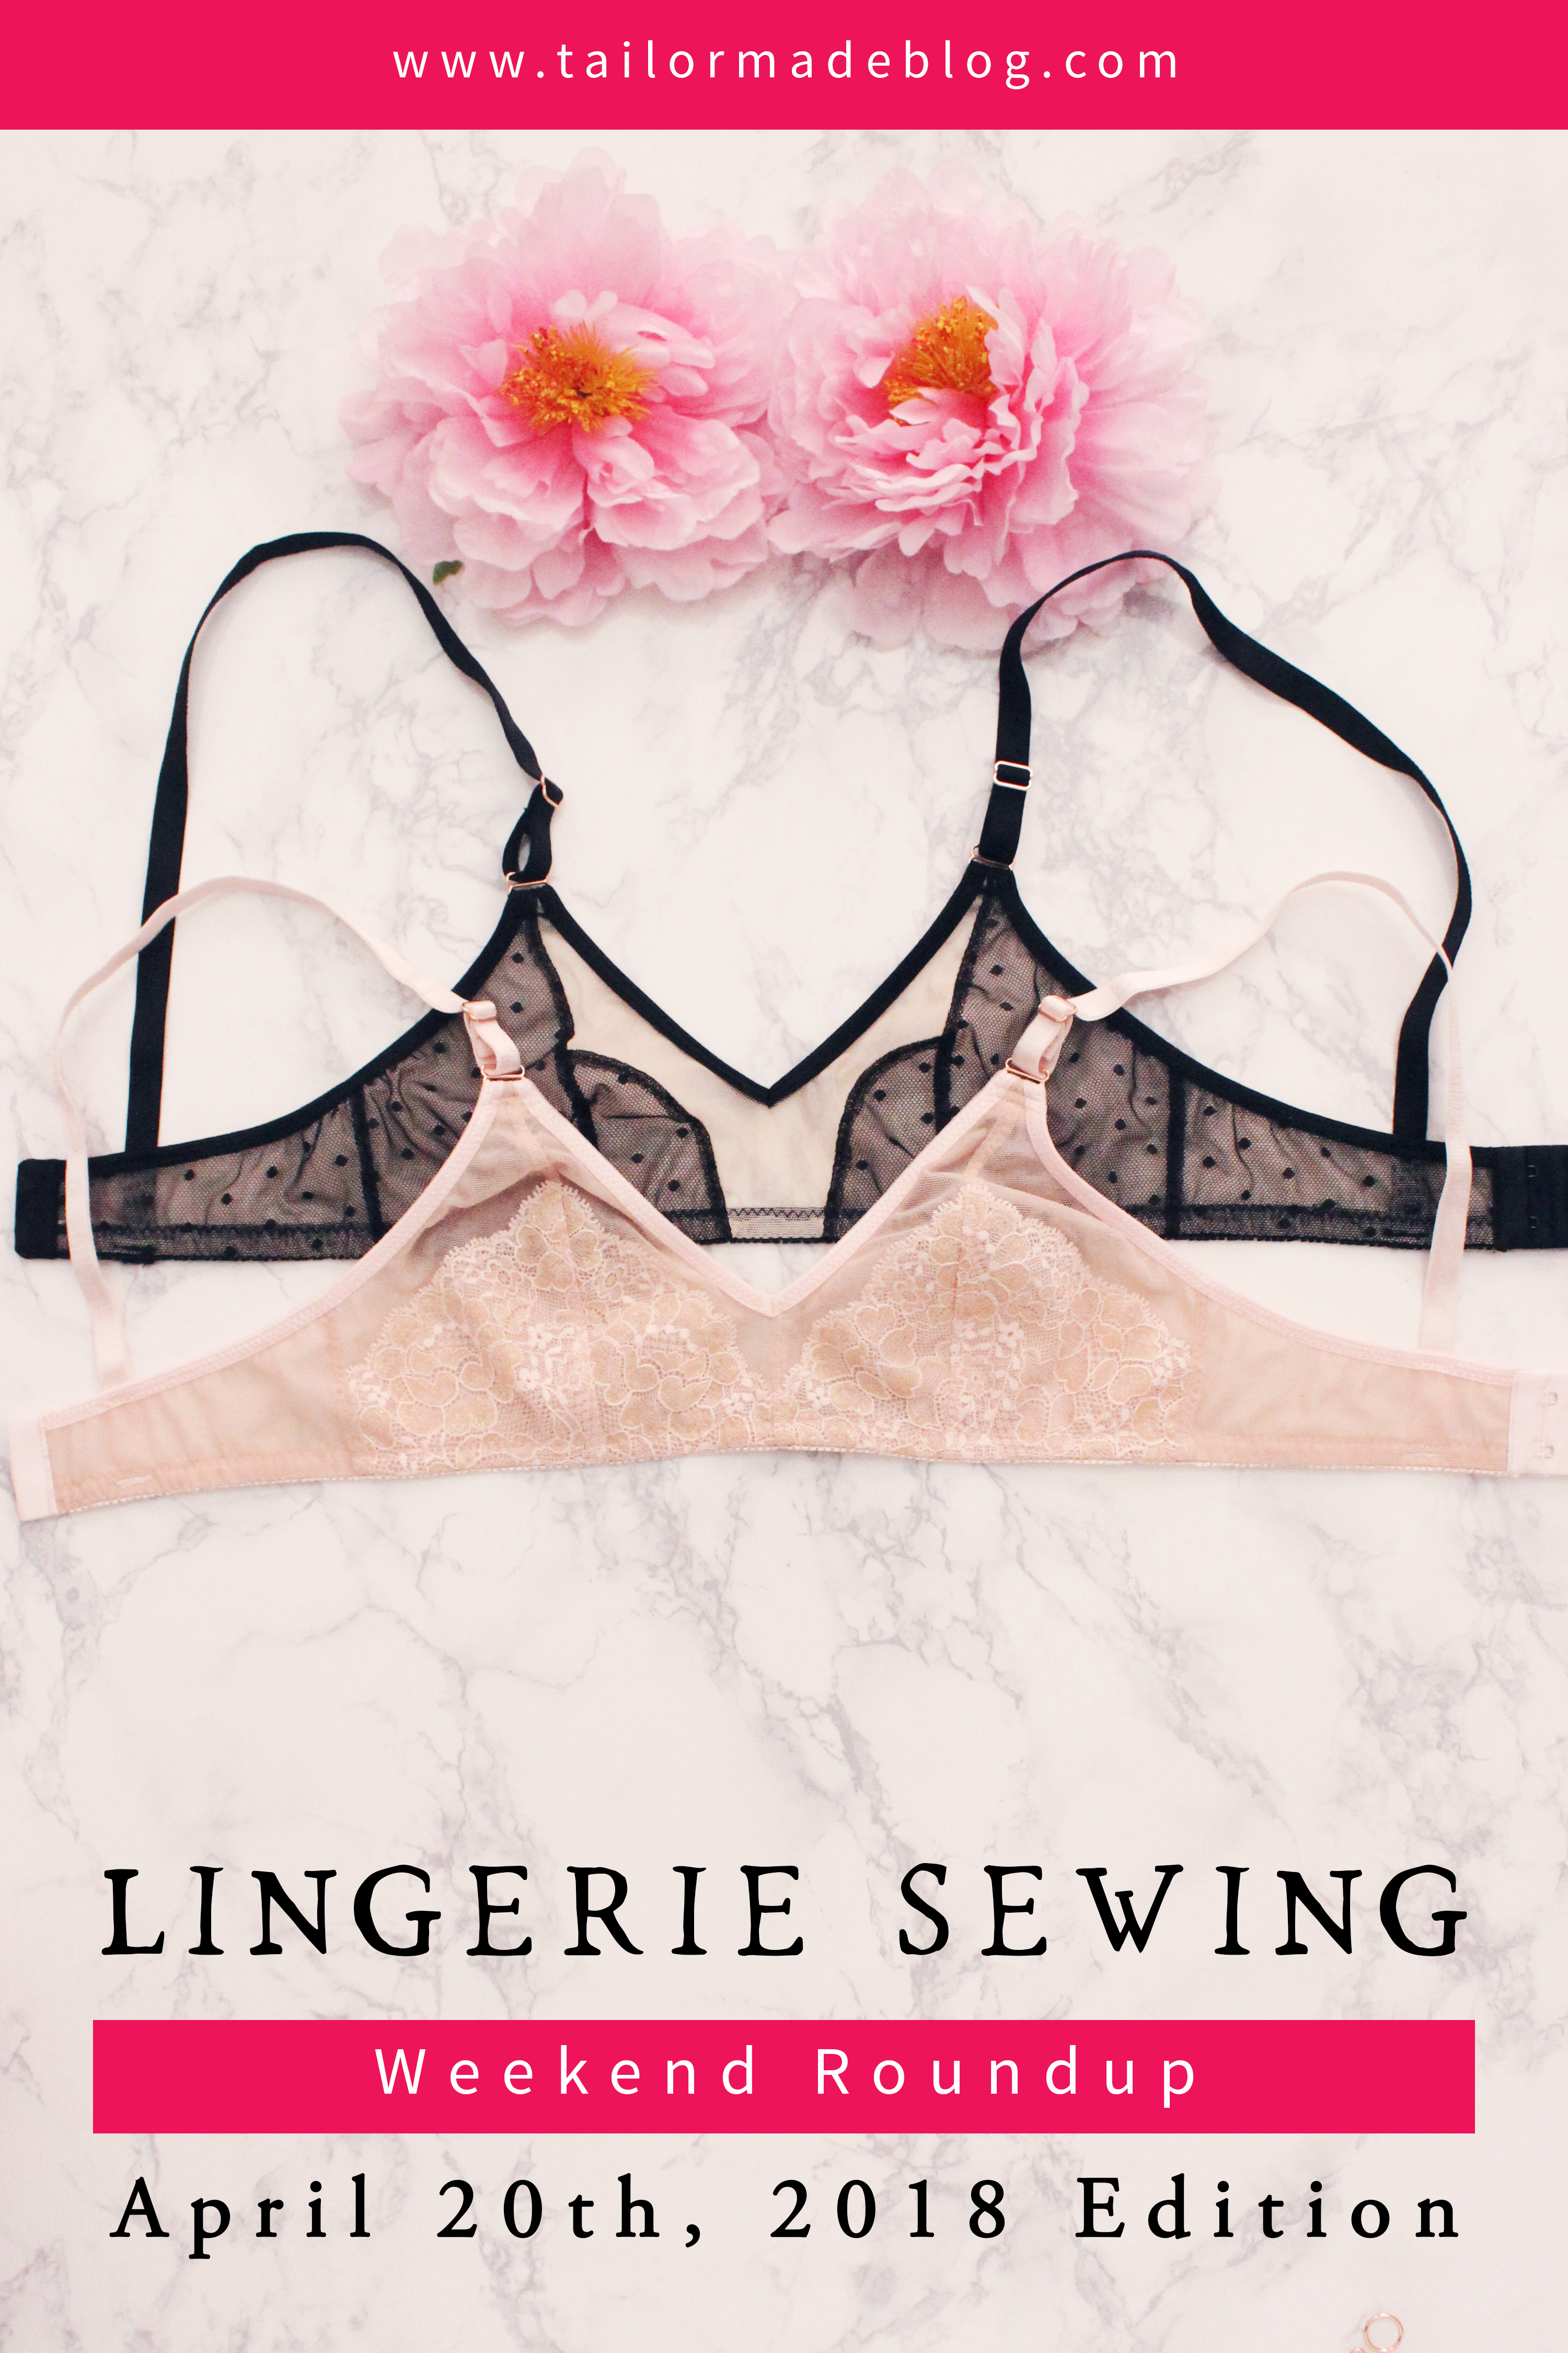 April 20th, 2018 Lingerie Sewing Weekend Round Up Latest news and makes and sewing projects from the lingerie sewing bra making community